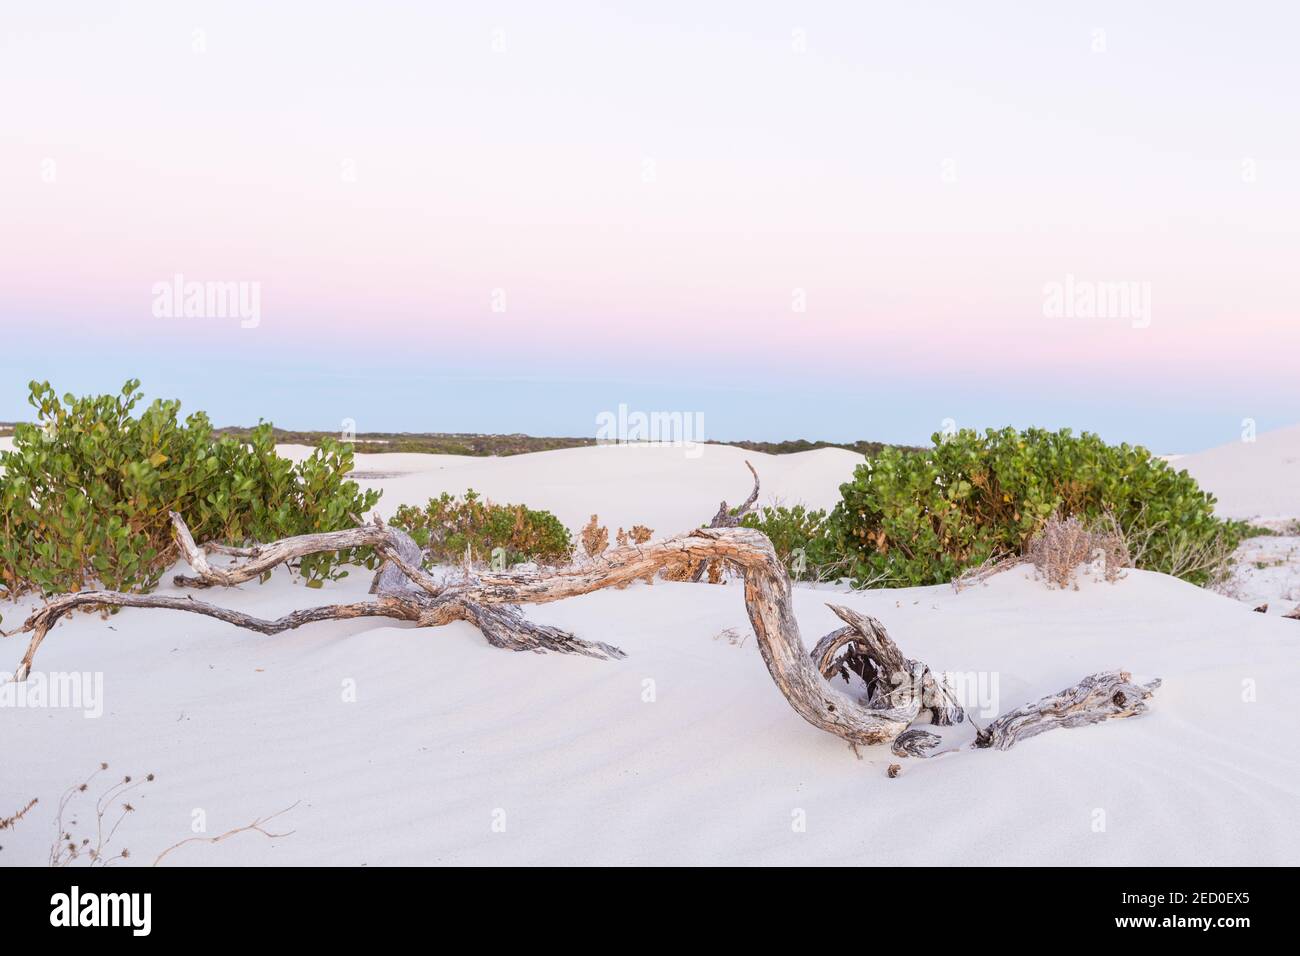 Dead tree branches and vegetation on white sand dunes at sunrise, Jurien Bay Stock Photo